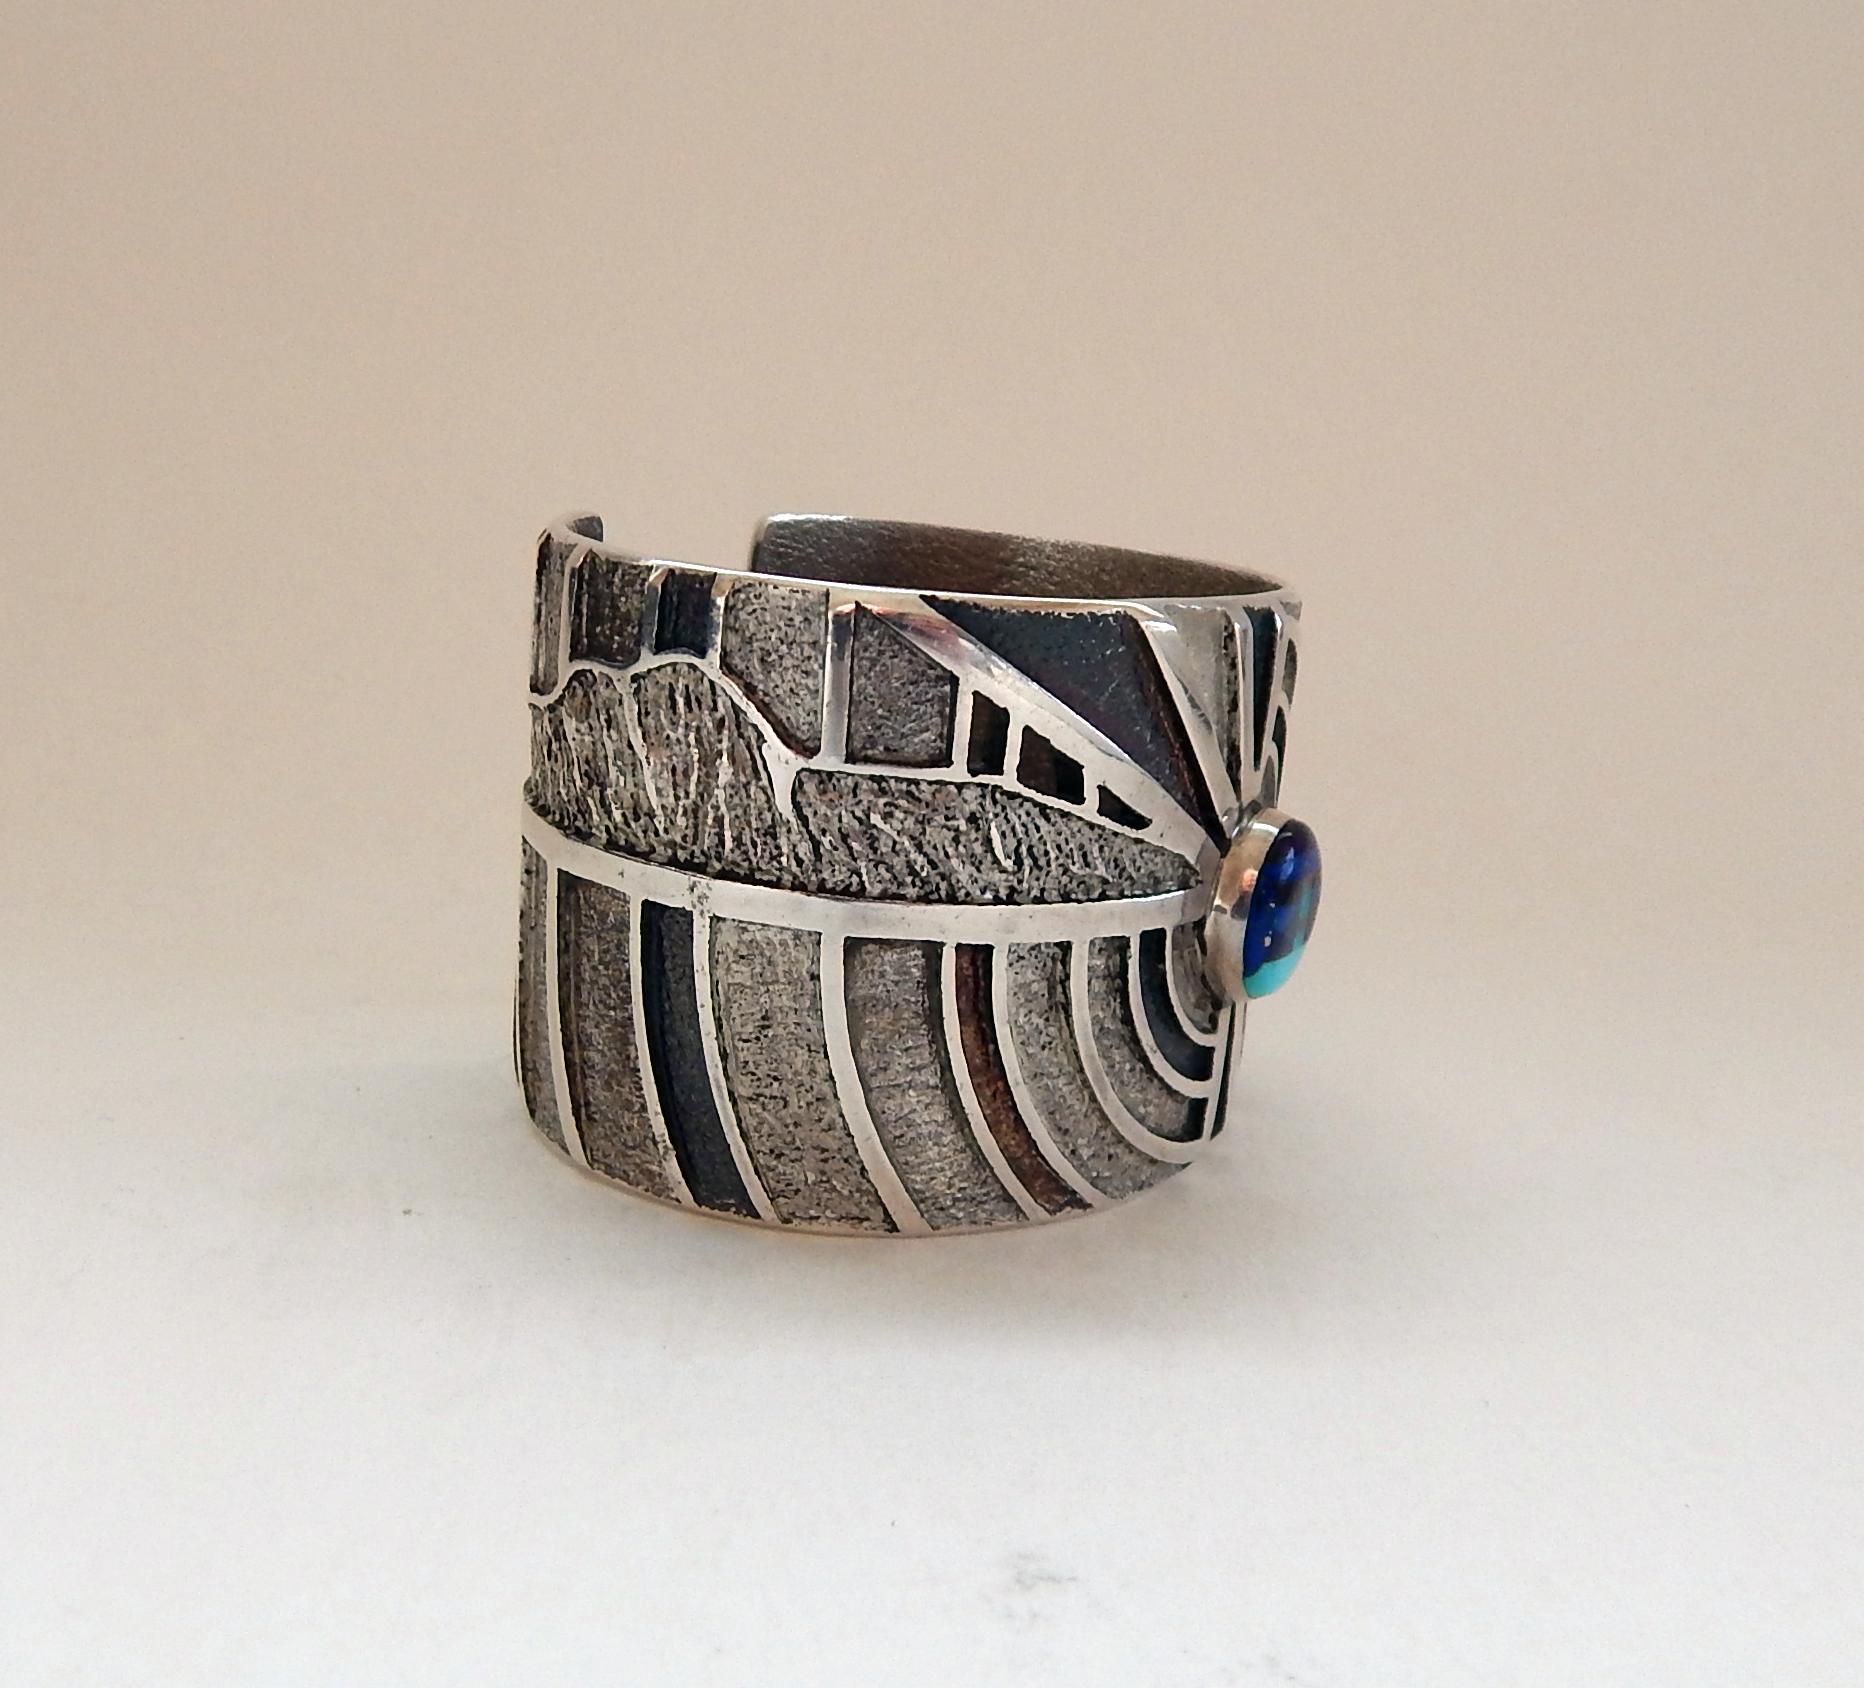 Contemporary Edward Charlie Navajo Jeweler, Sterling Bracelet with Lapis and Turquoise